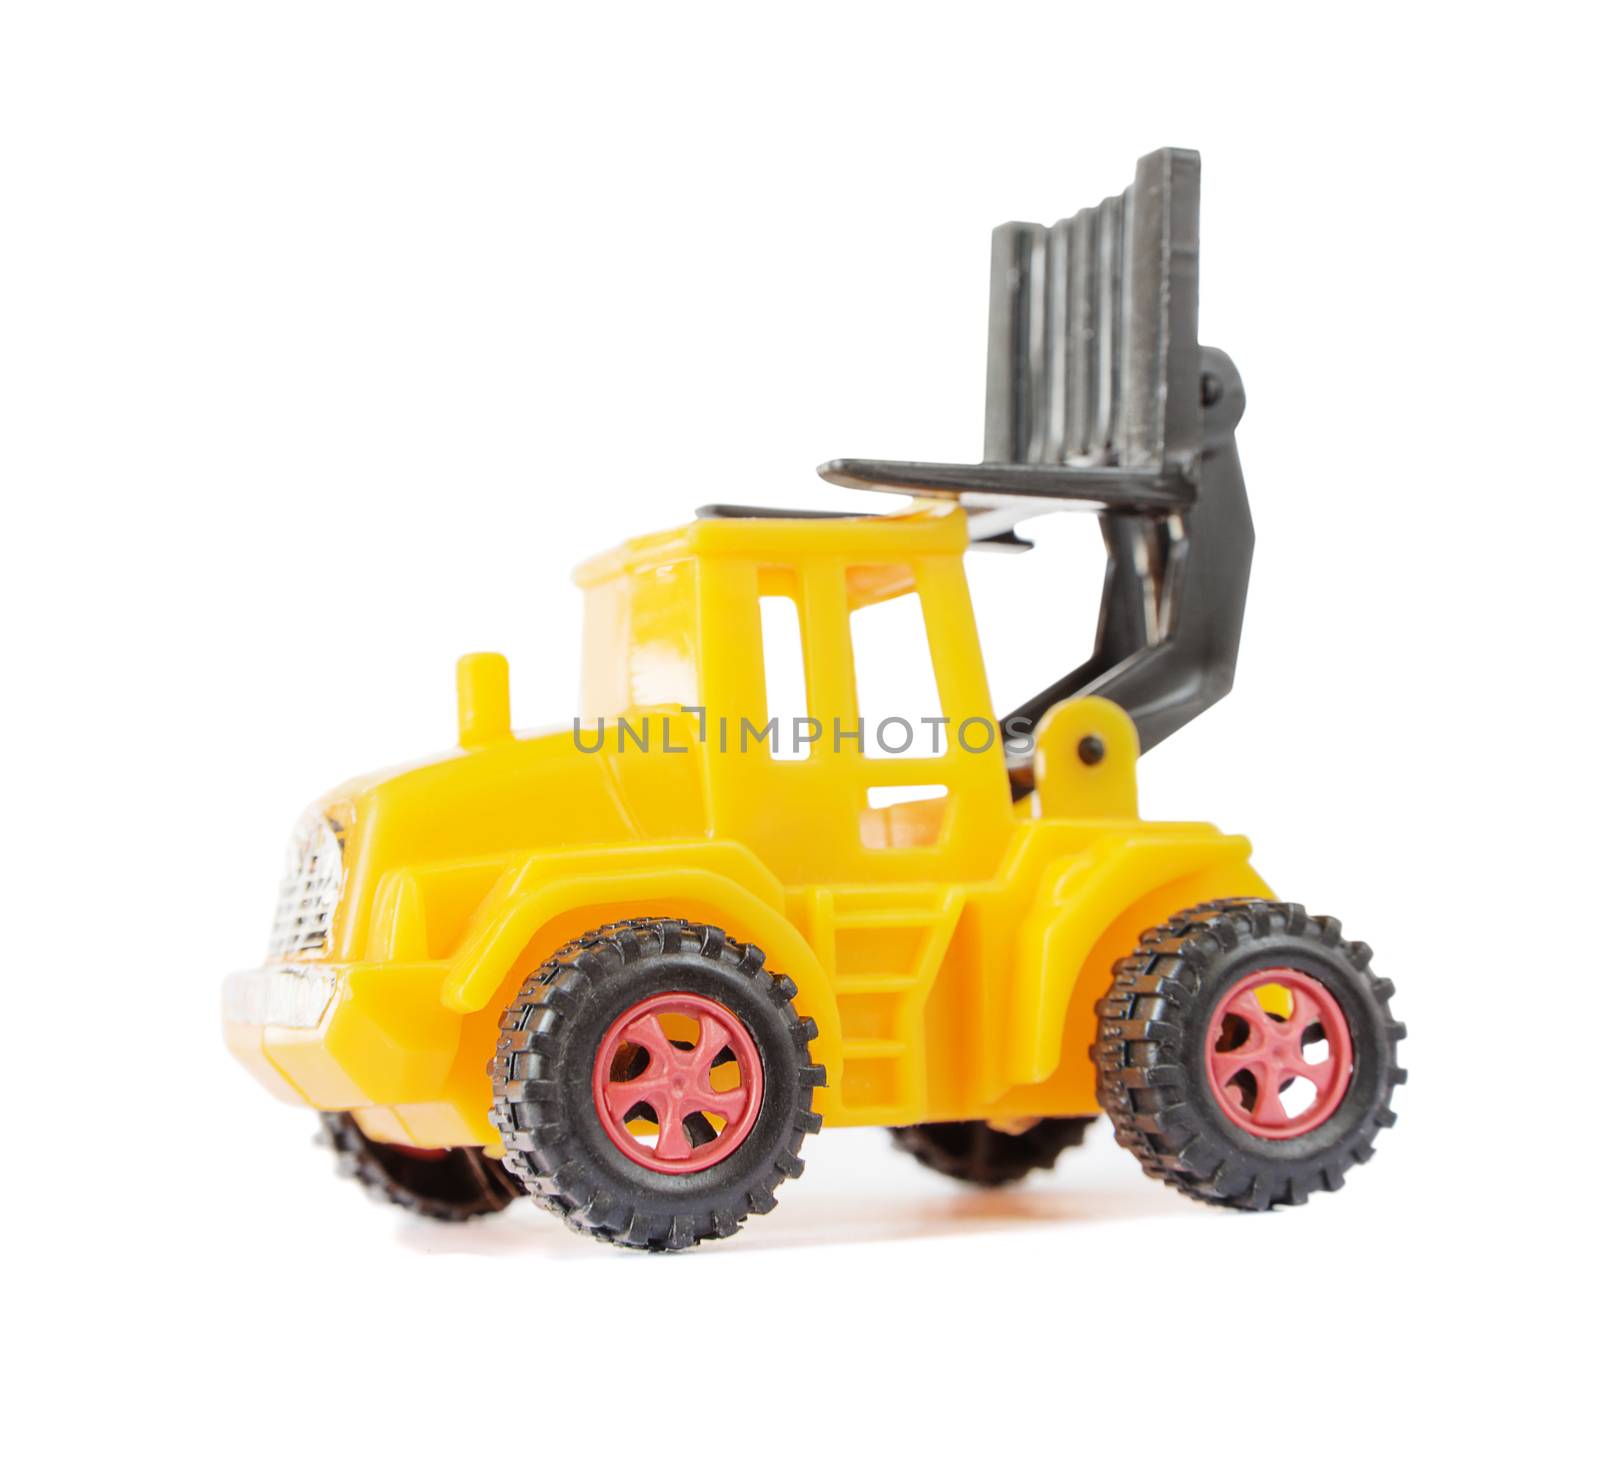 Yellow toy forklift made of plastic, with a raised loader, isolated on a white background, side view